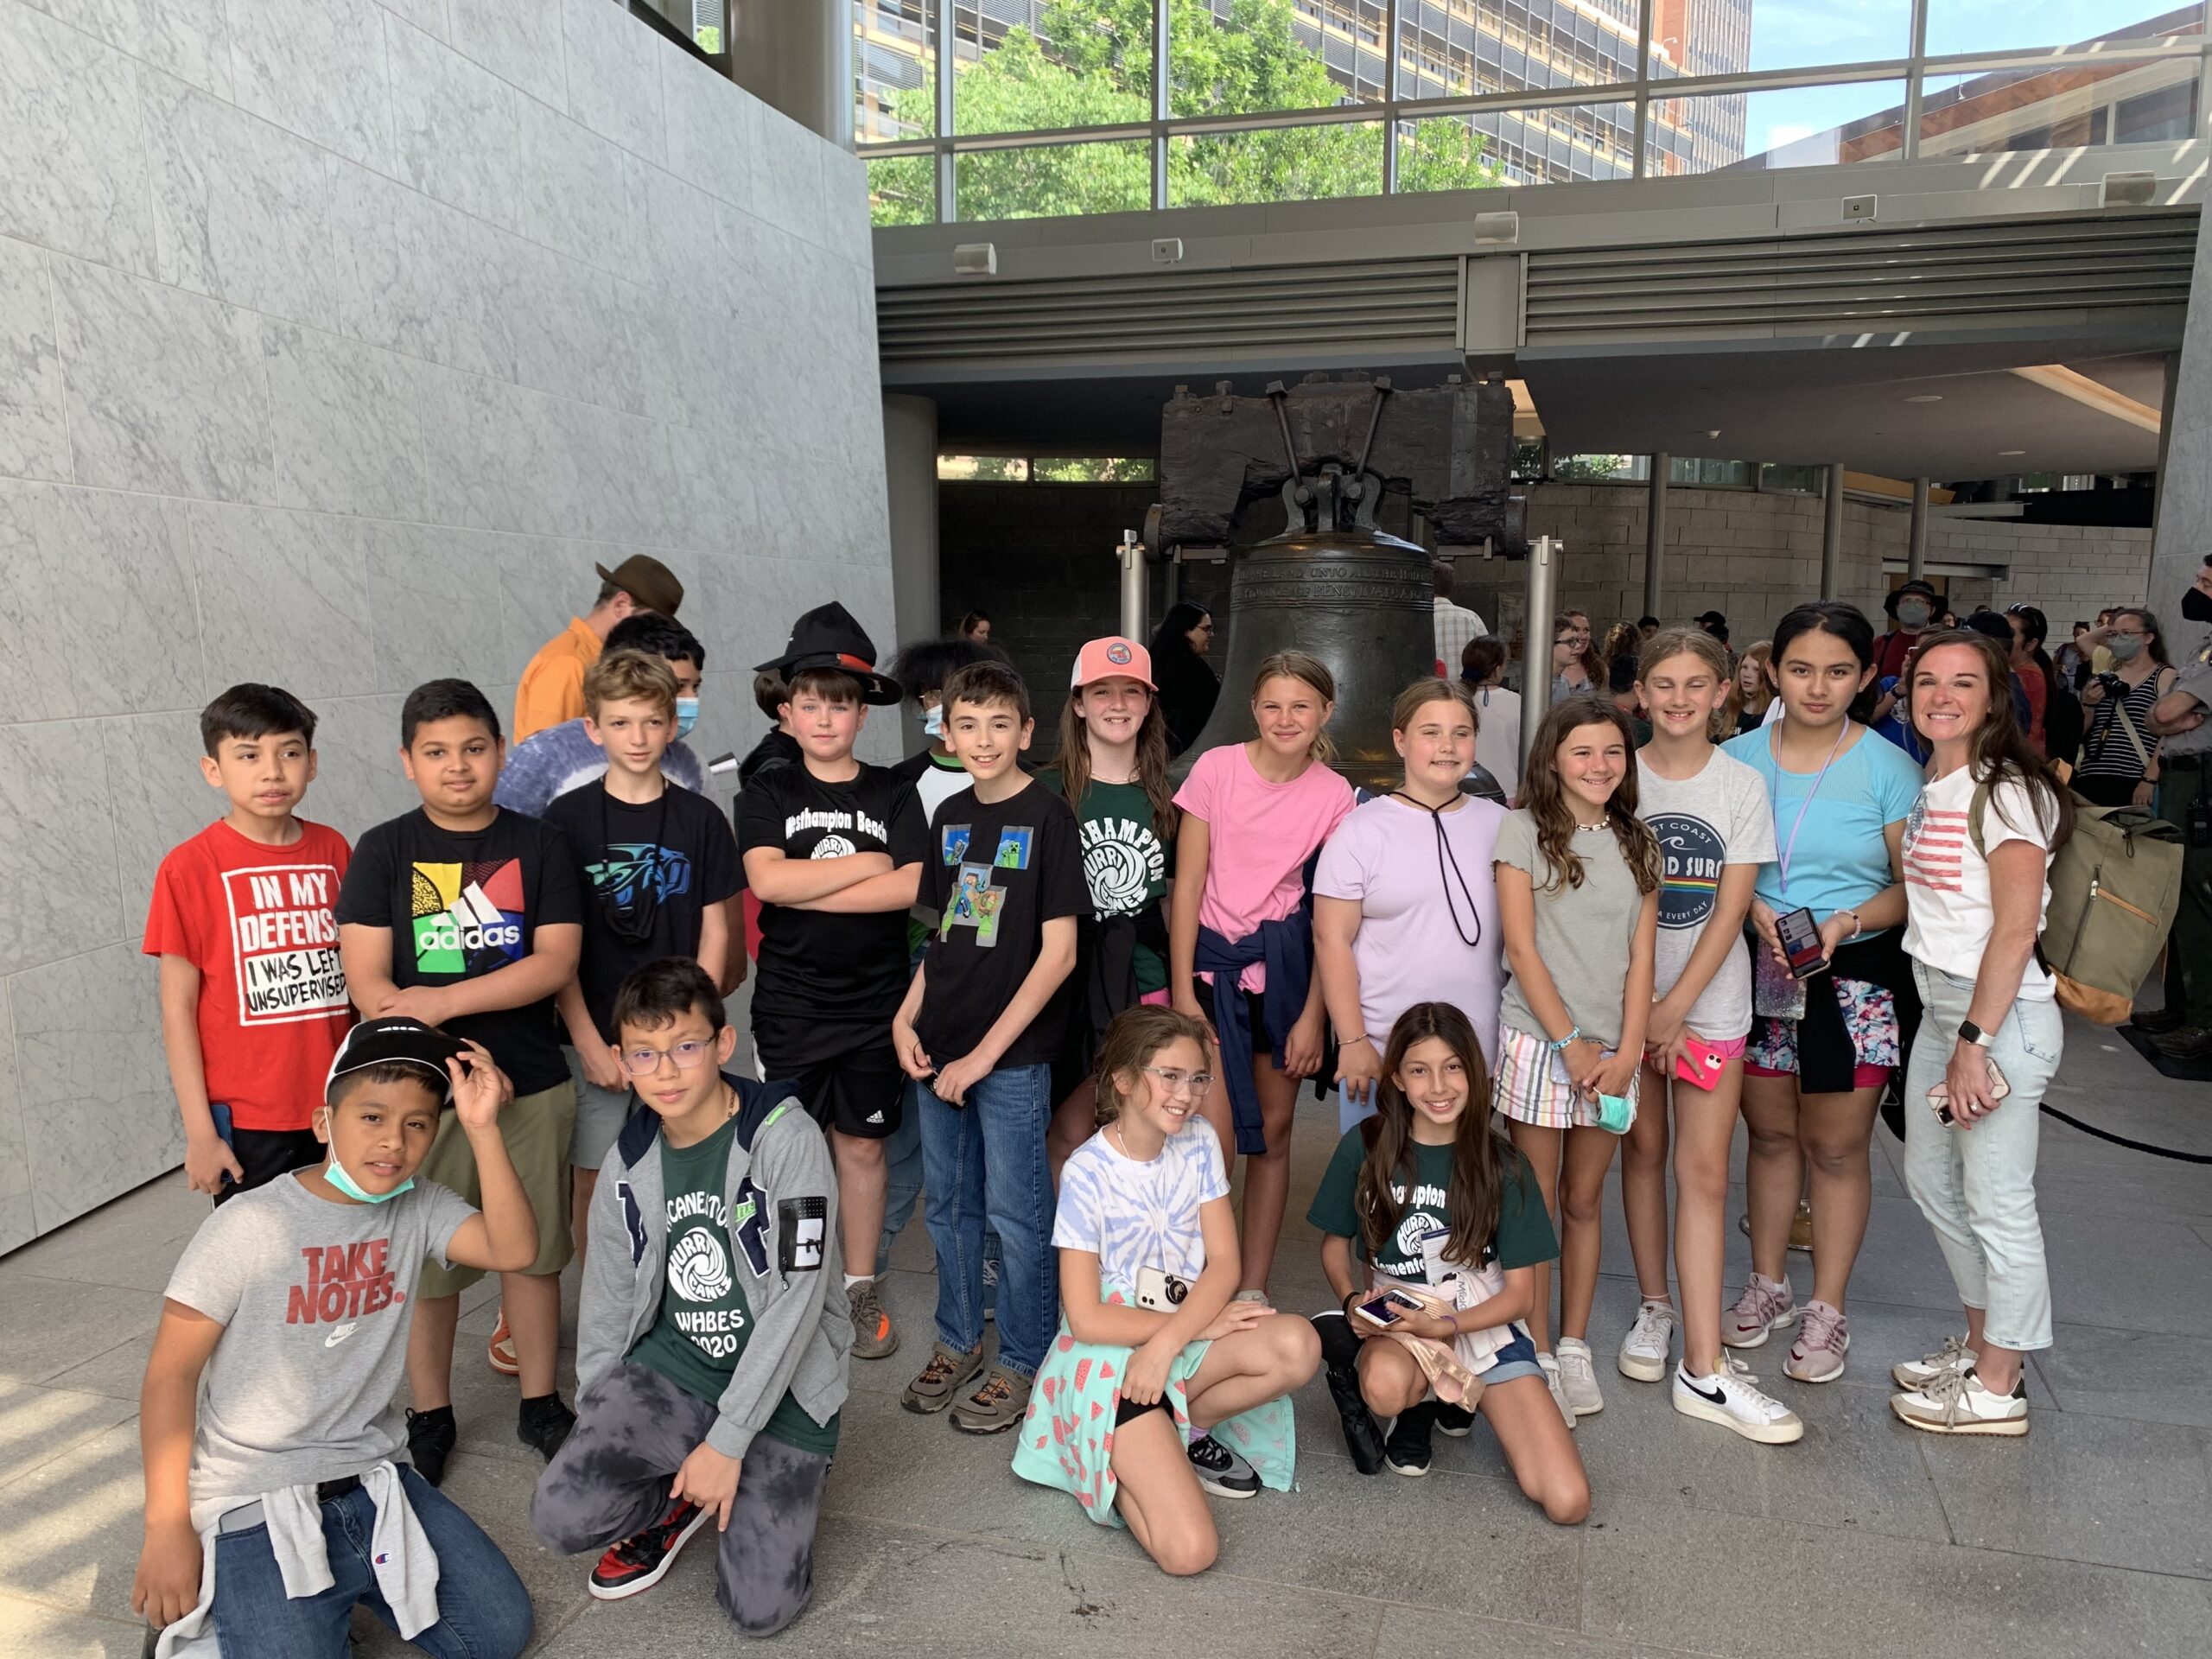 Fifth grade students at Westhampton Beach Elementary School recently took an educational field trip to Philadelphia. They explored the city’s vast history at sites such as the National Constitution Center and Elfreth’s Alley Museum, where the exhibits correlated to the social studies curriculum they have been studying. COURTESY WESTHAMPTON BEACH SCHOOL DISTRICT